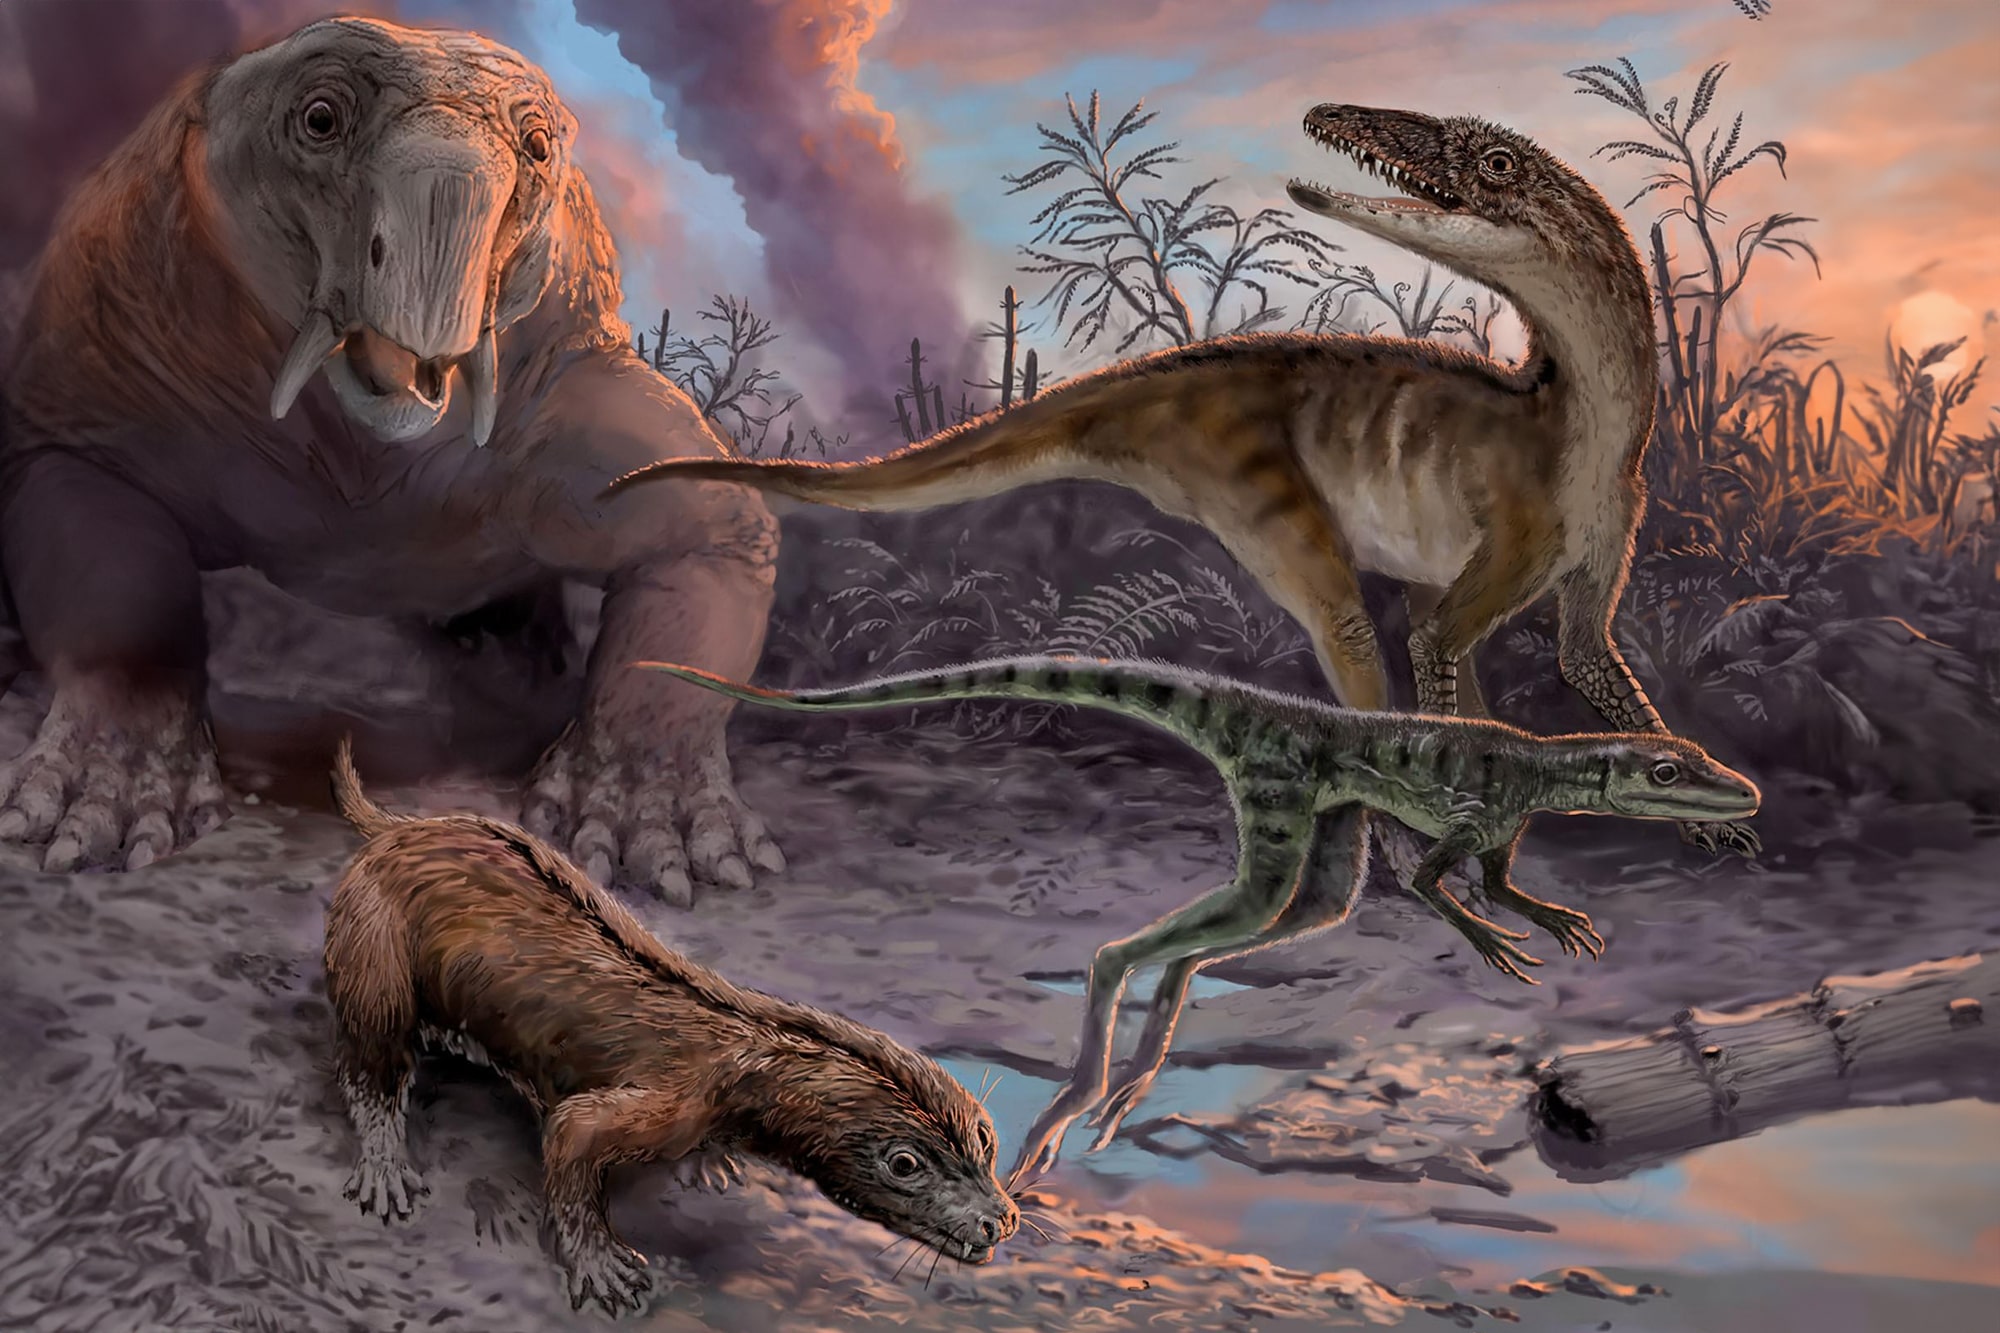 Computer illustration of dinosaurs and a small mammal